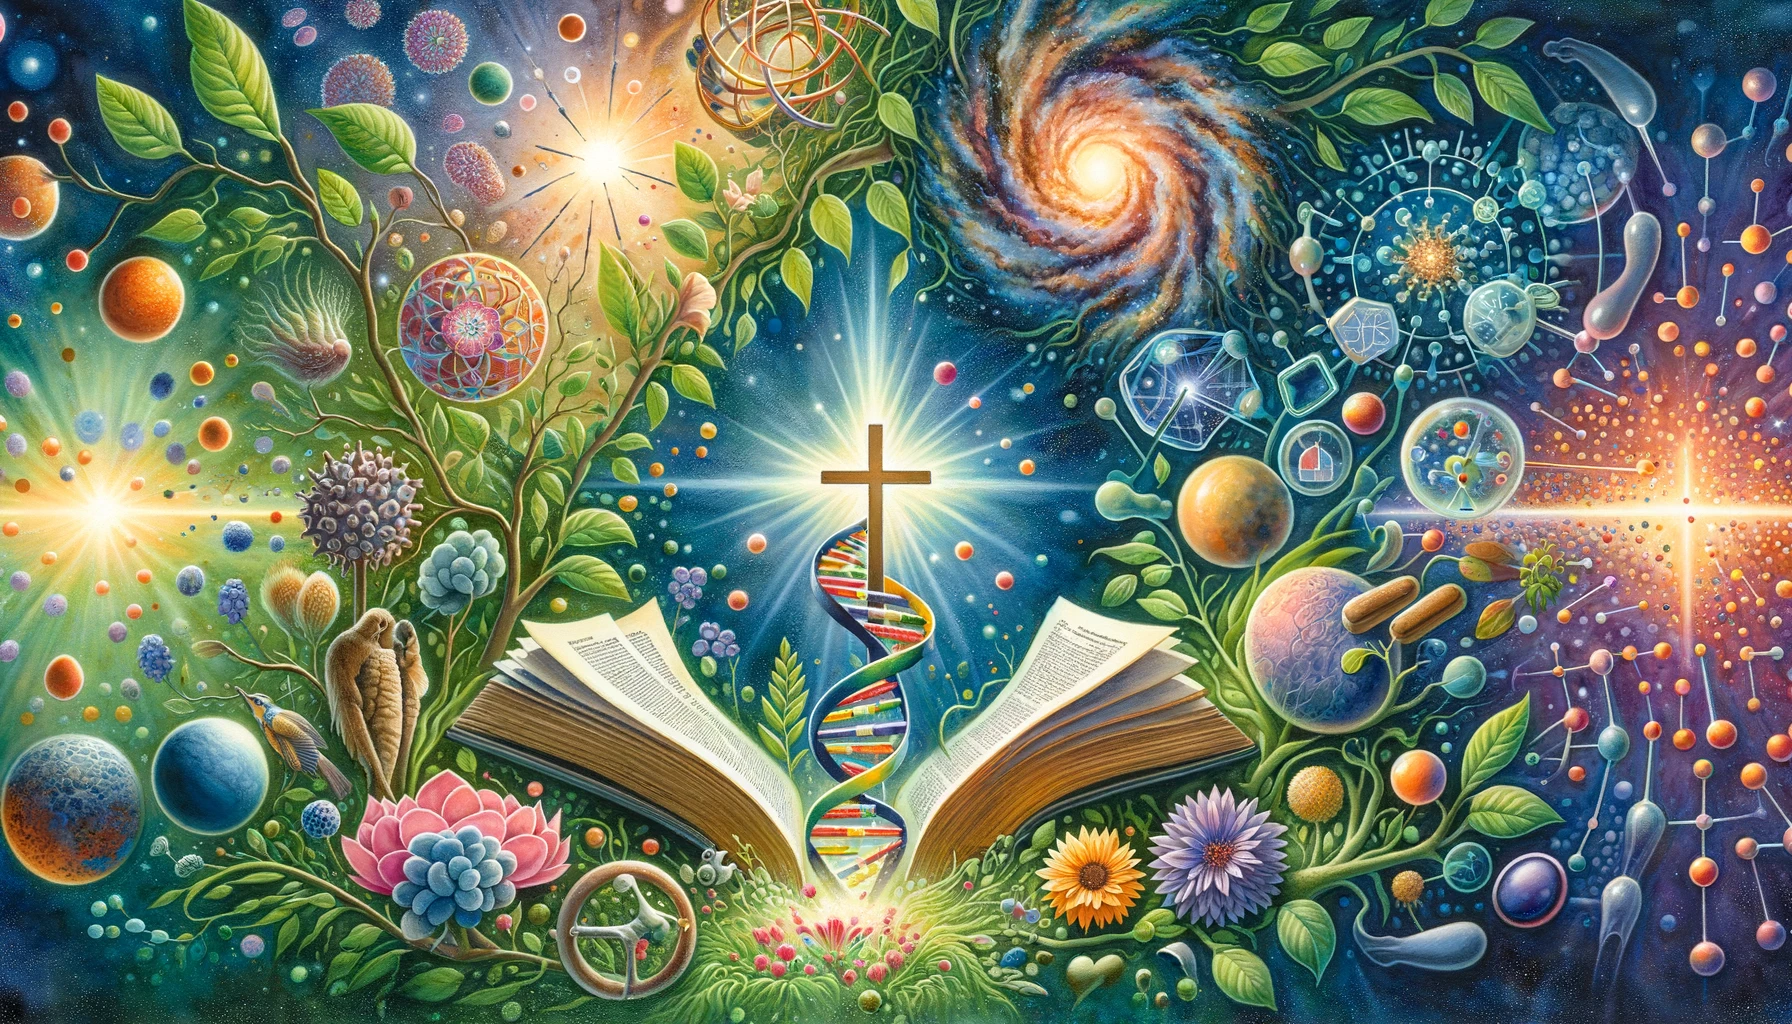 Open Bible merging into DNA helix with a cross illuminating a galaxy, symbolizing the unity of faith and science.